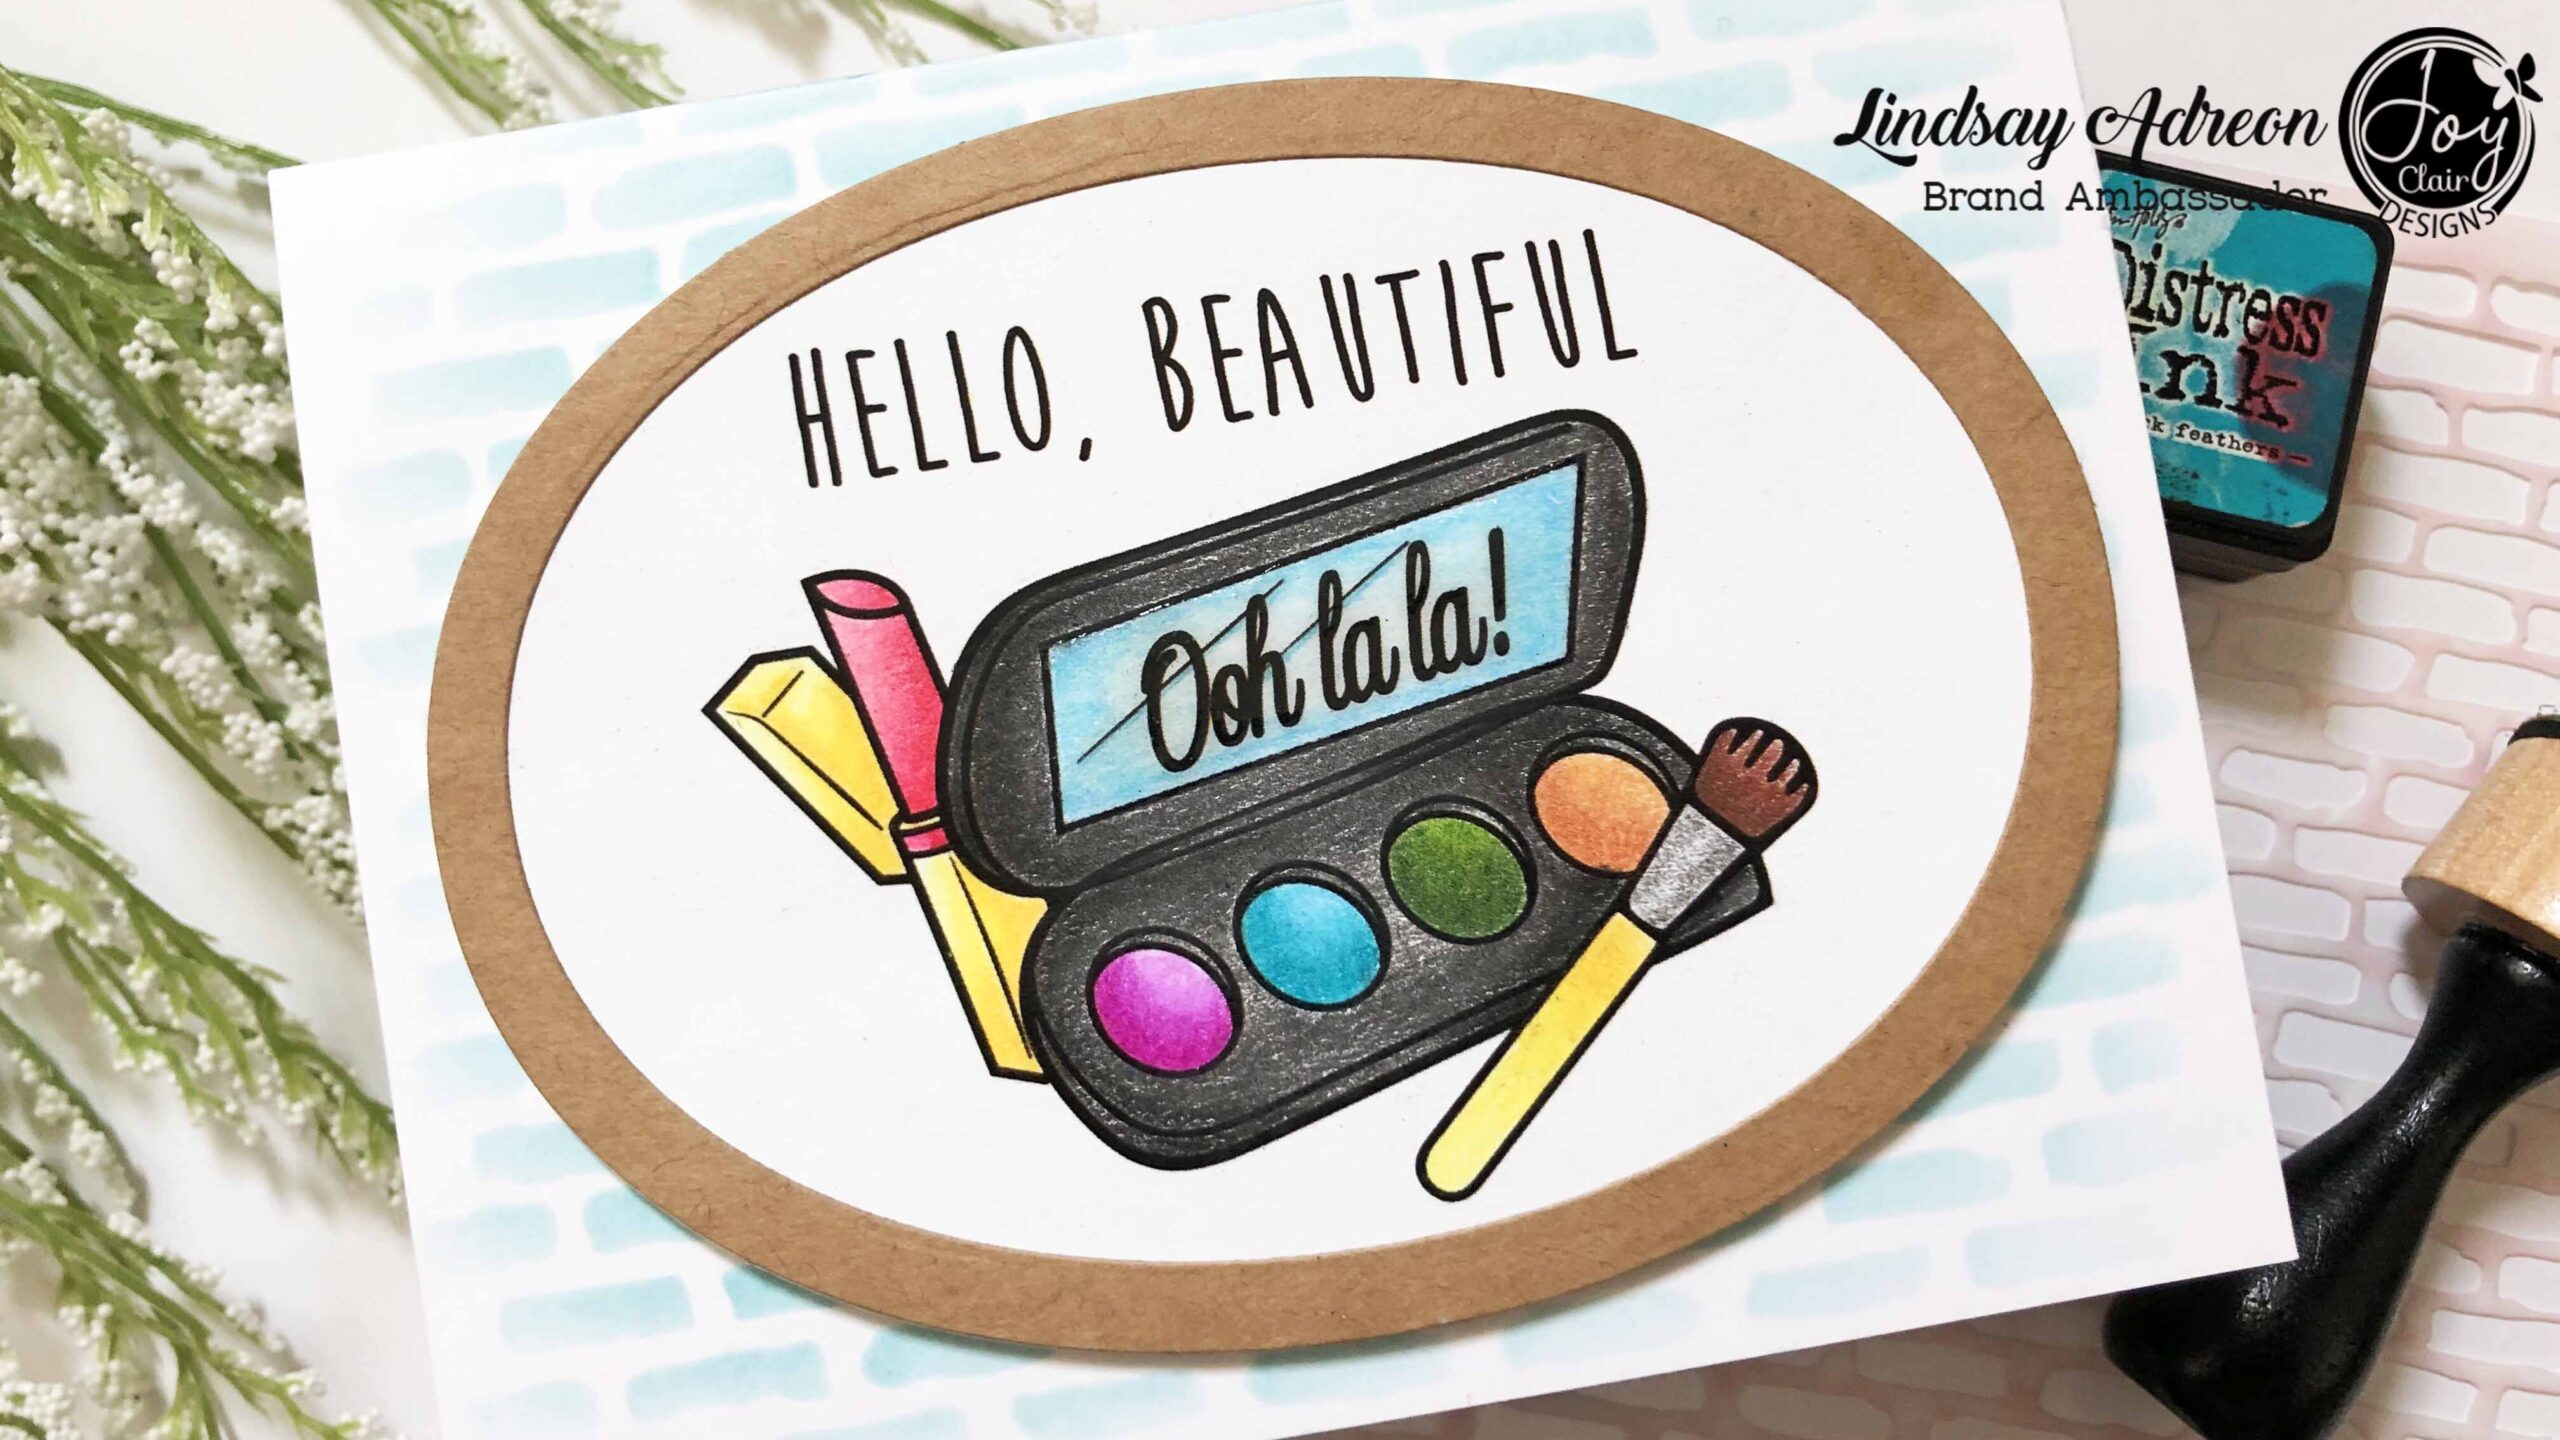 I finished this digital stamped hello card by adding the image to a stenciled card base. I also added a frame to help highlight the images from the Oh La La digital stamp set.